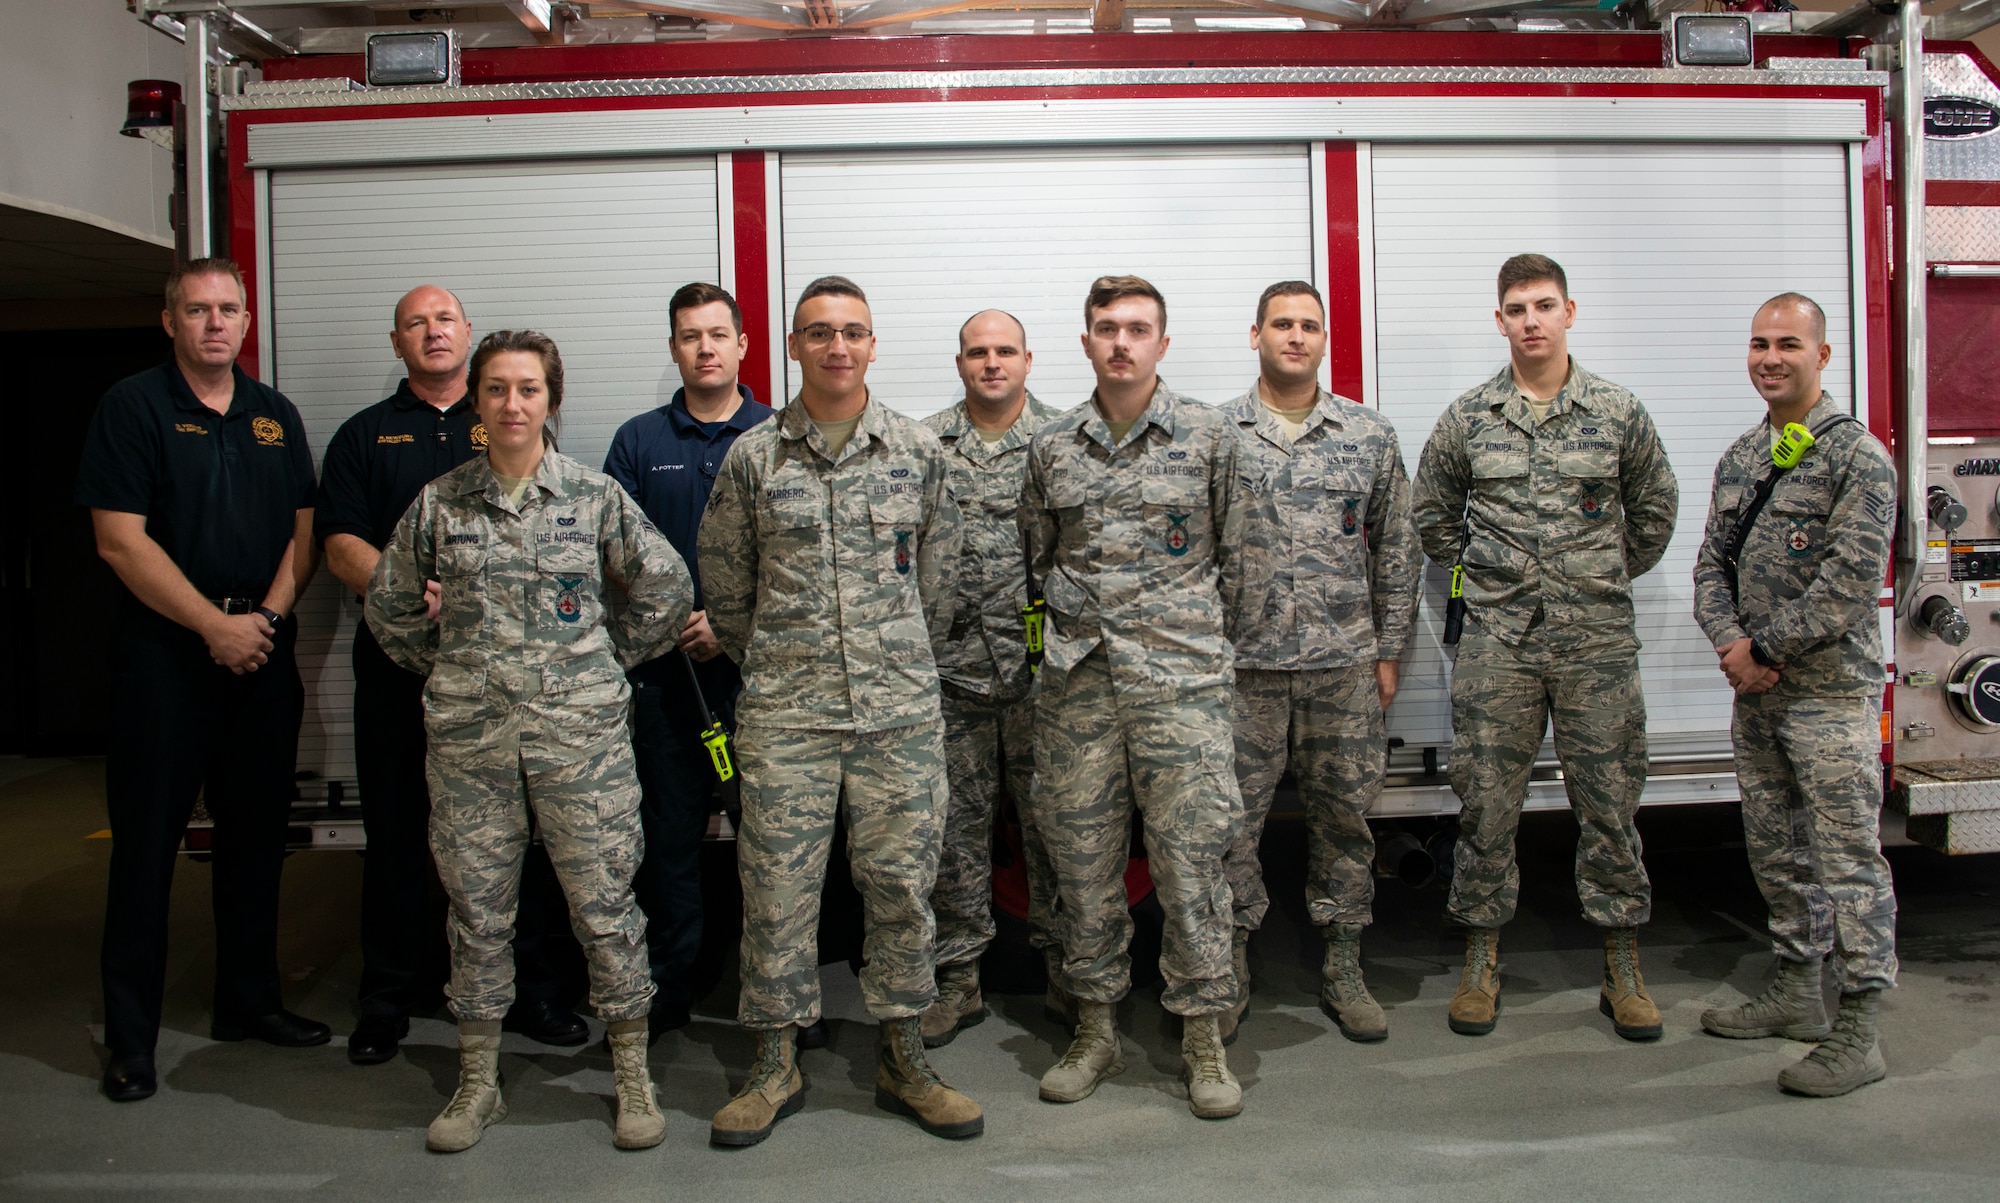 Airmen from the 325th Civil Engineering Squadron pose for a group photo at Tyndall Air Force Base, Florida, Jan. 31, 2020. Tyndall's fire prevention element's hard work and dedication has led to the 325th CES being named the 2019 Air Combat Command Fire Prevention Program of the Year. (U.S. Air Force photo by 2nd Lt. Kayla Fitzgerald)